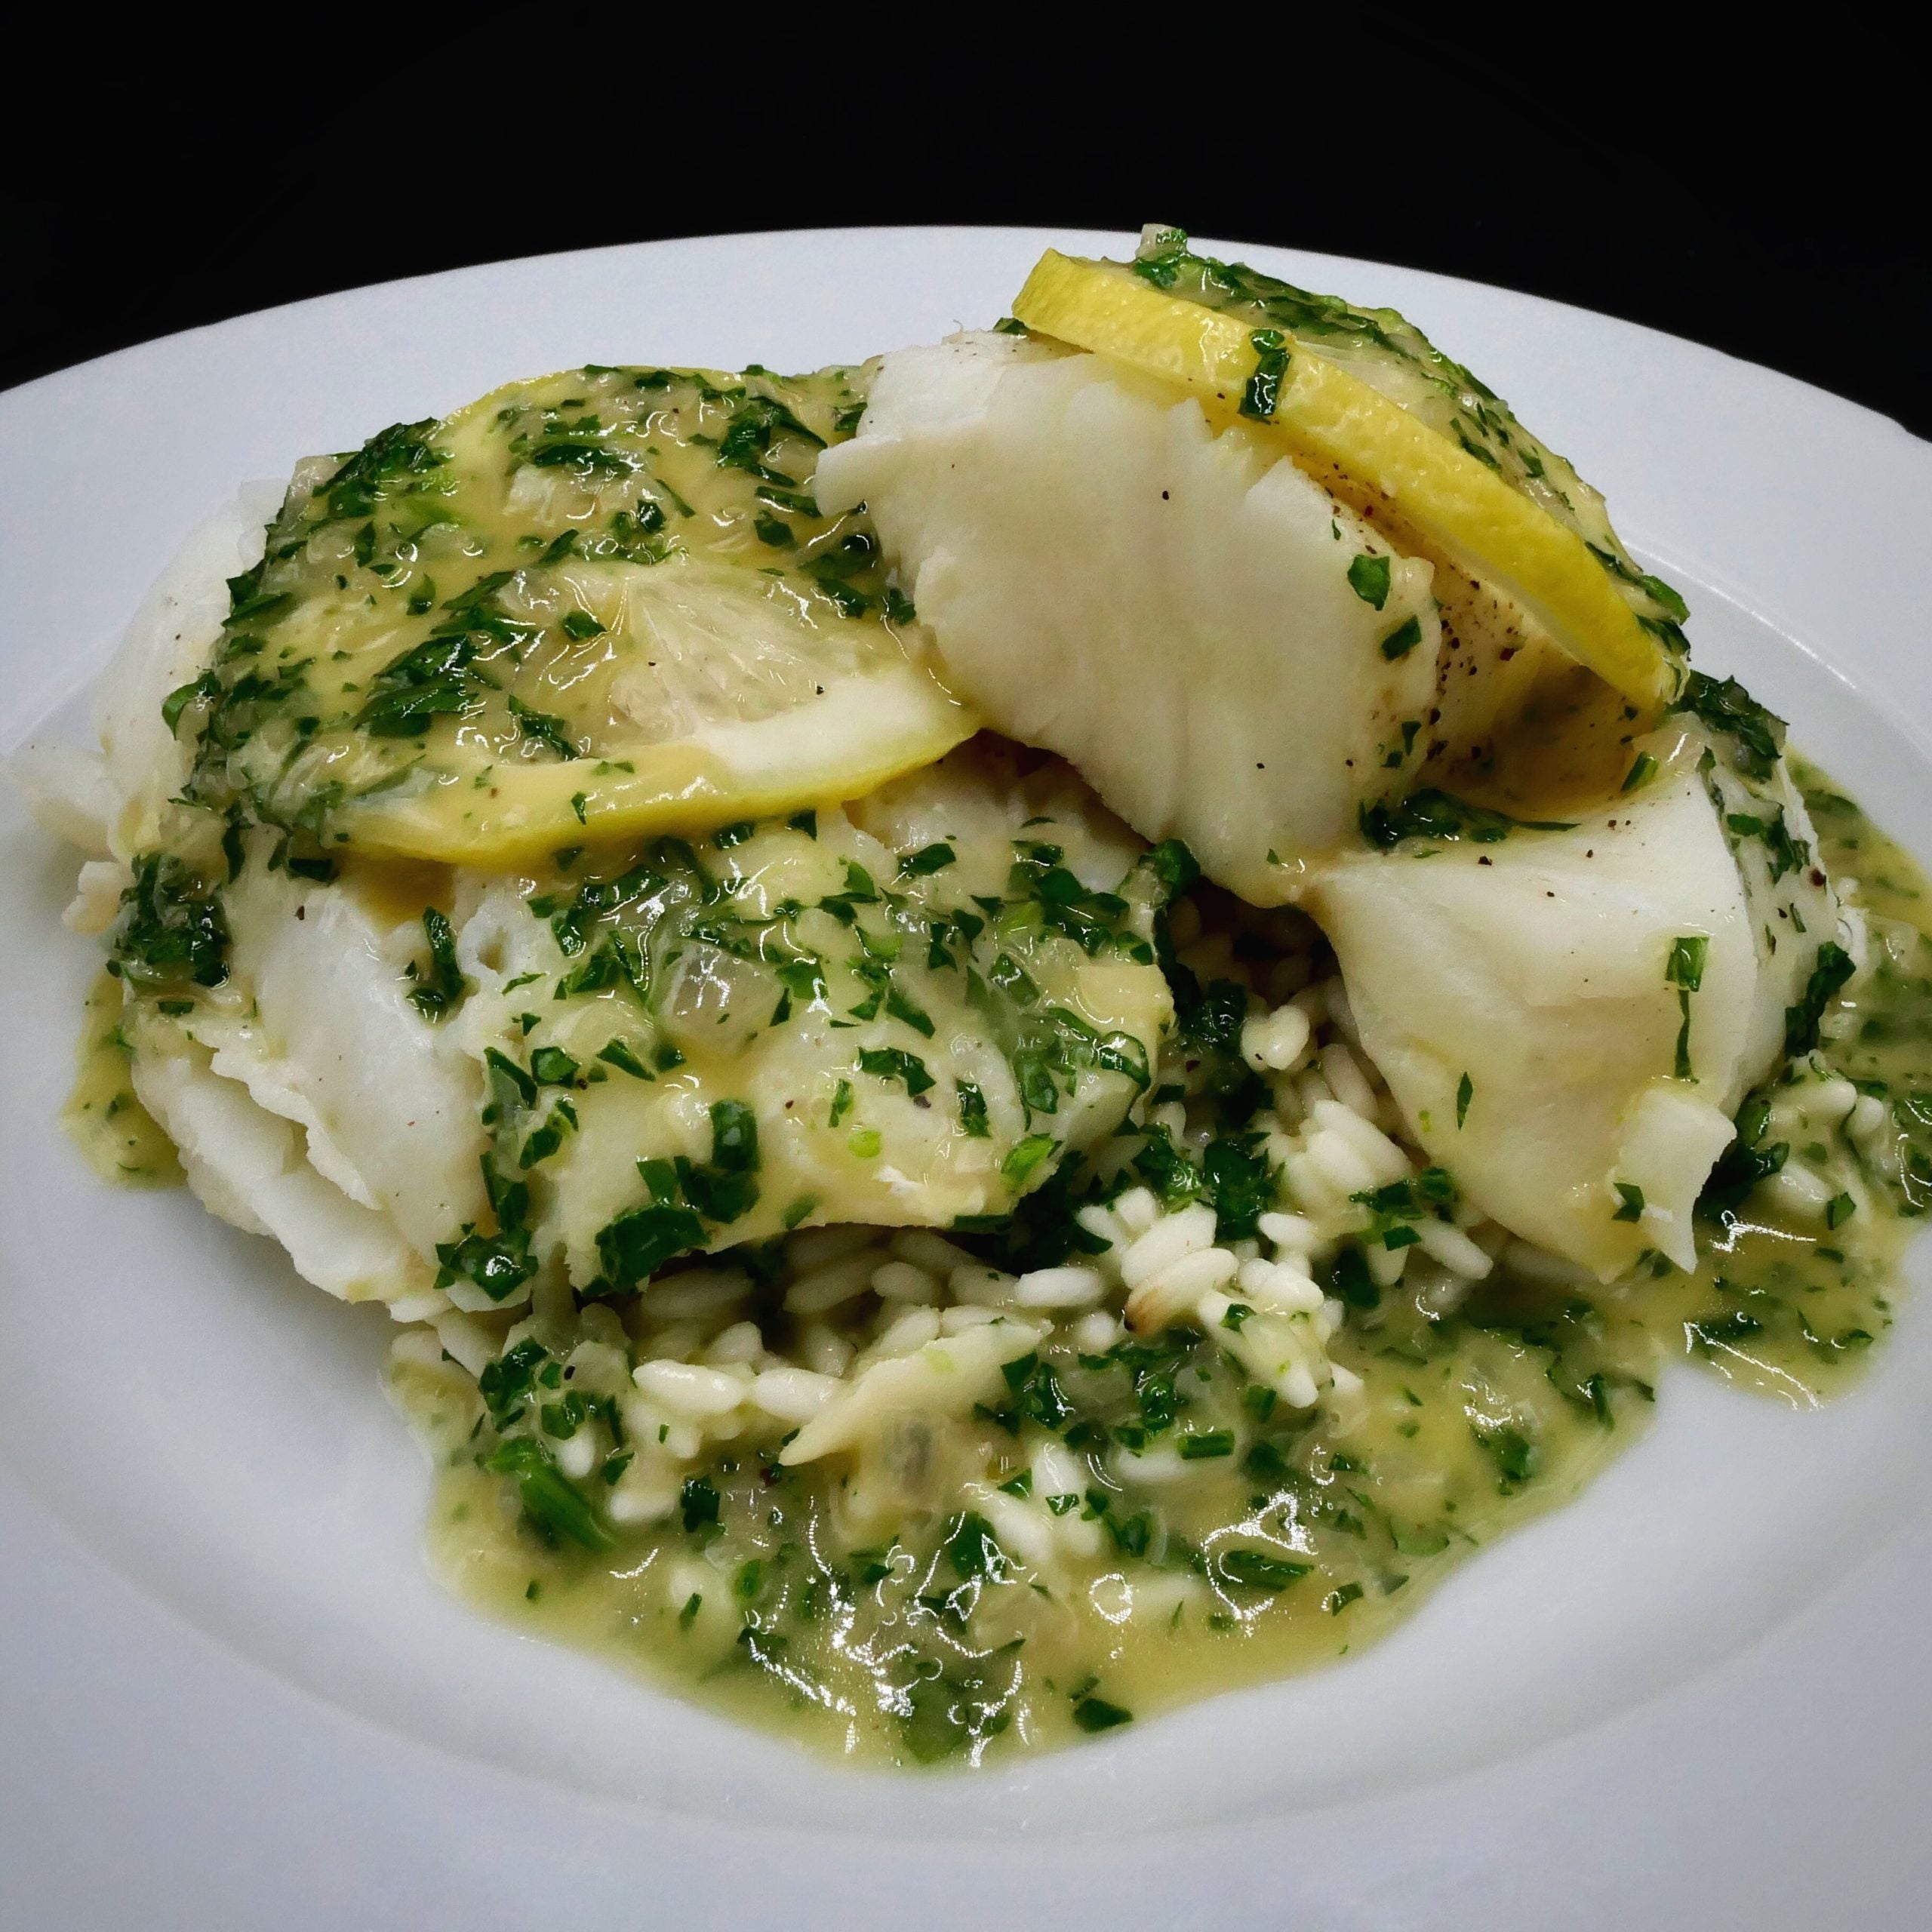 Baked Cod topped with butter, lemon, and parsley on a white plate